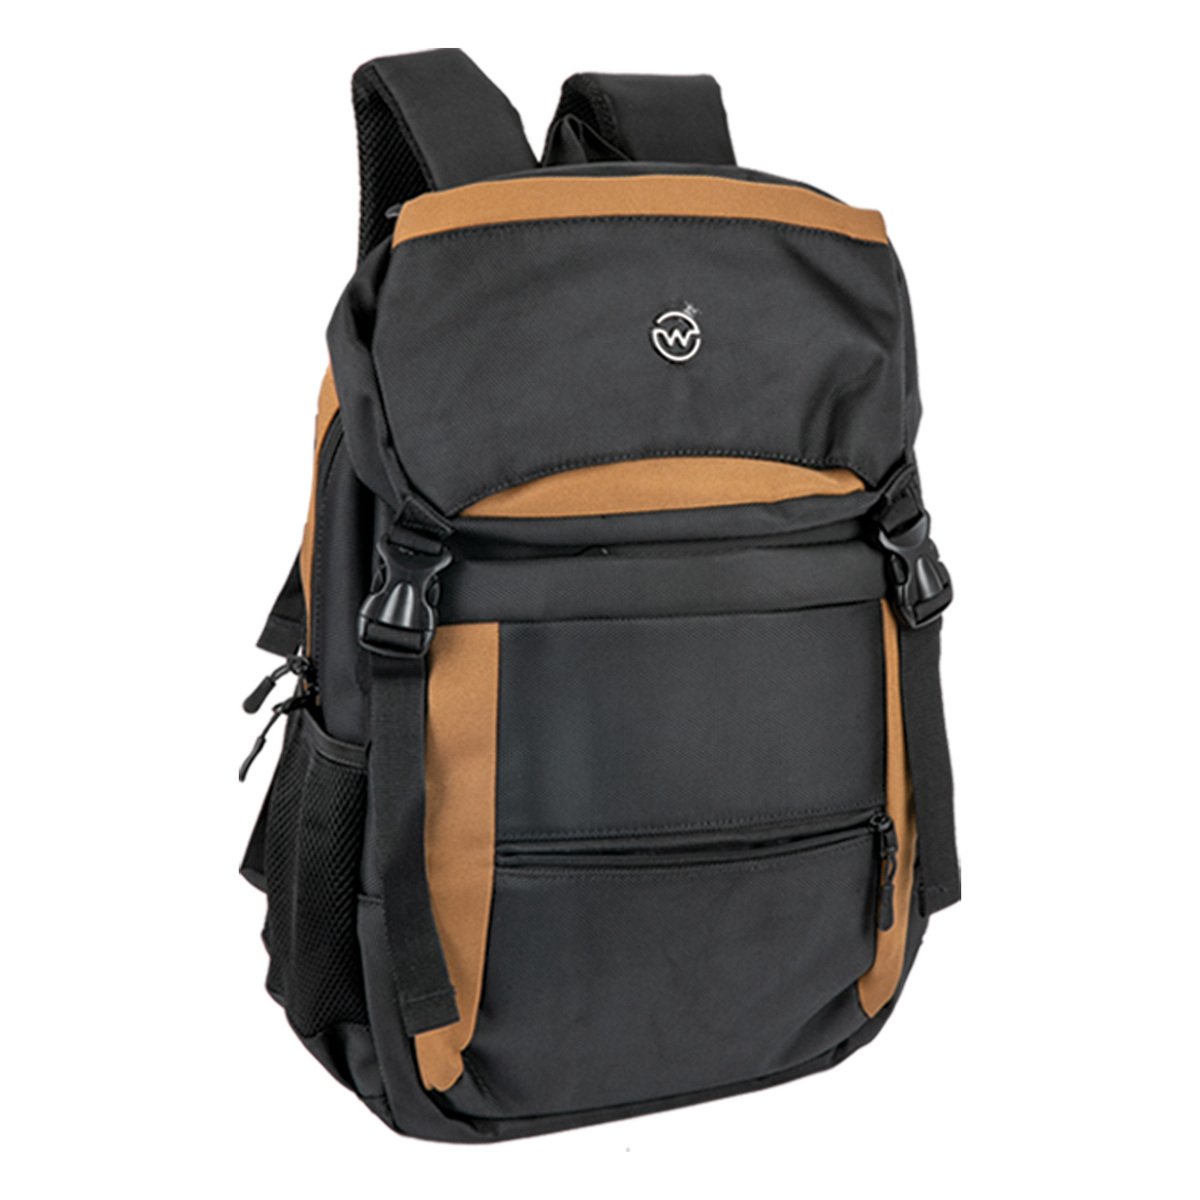 Wagon R Laptop Backpack 19inch Assorted